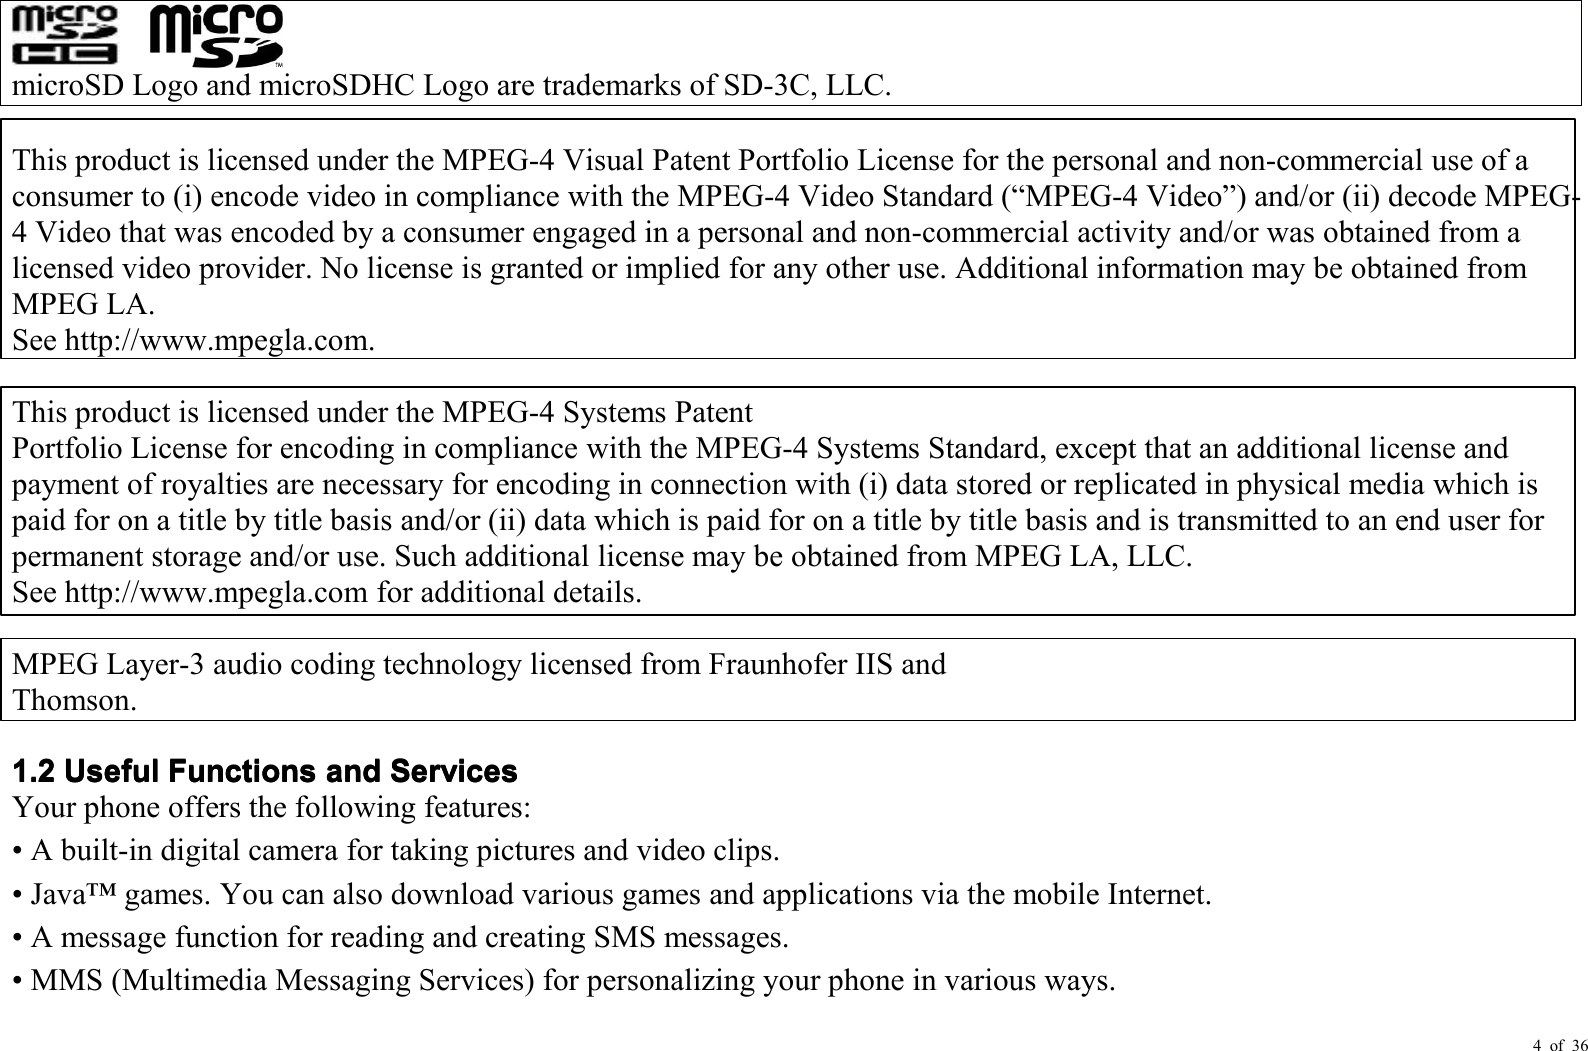 4 of 36microSD Logo and microSDHC Logo are trademark s of SD-3C, LLC.This product is licensed under the MPEG-4 Visual Patent Portfolio License for the personal and non-commercial use of aconsumer to (i) encode video in compliance with the MPEG-4 Video Standard ( “ MPEG-4 Video ” ) and/or (ii) decode MPEG-4 Video that was encoded by a consumer engaged in a personal and non-commercial activity and/or was obtained from alicensed video provider. No license is granted or implied for any other use. Additional information may be obtained fromMPEG LA.See http://www.mpegla.com.This product is licensed under the MPEG-4 Systems PatentPortfolio License for encoding in compliance with the MPEG-4 Systems Standard, except that an additional license andpayment of royalties are necessary for encoding in connection with (i) data stored or replicated in physical media which ispaid for on a title by title basis and/or (ii) data which is paid for on a title by title basis and is transmitted to an end user forpermanent storage and/or use. Such additional license may be obtained from MPEG LA, LLC.See http://www.mpegla.com for additional details.MPEG Layer-3 audio coding technology licensed from Fraunhofer IIS andThomson.1.21.21.21.2UsefulUsefulUsefulUsefulFunctionsFunctionsFunctionsFunctionsandandandandServicesServicesServicesServicesYour phone offers the following features:• A built-in digital camera for taking pictures and video clips.• Java ™ games. You can also download various games and applications via the mobile Internet.• A message function for reading and creating SMS messages.• MMS (Multimedia Messaging Services) for personali z ing your phone in various ways.